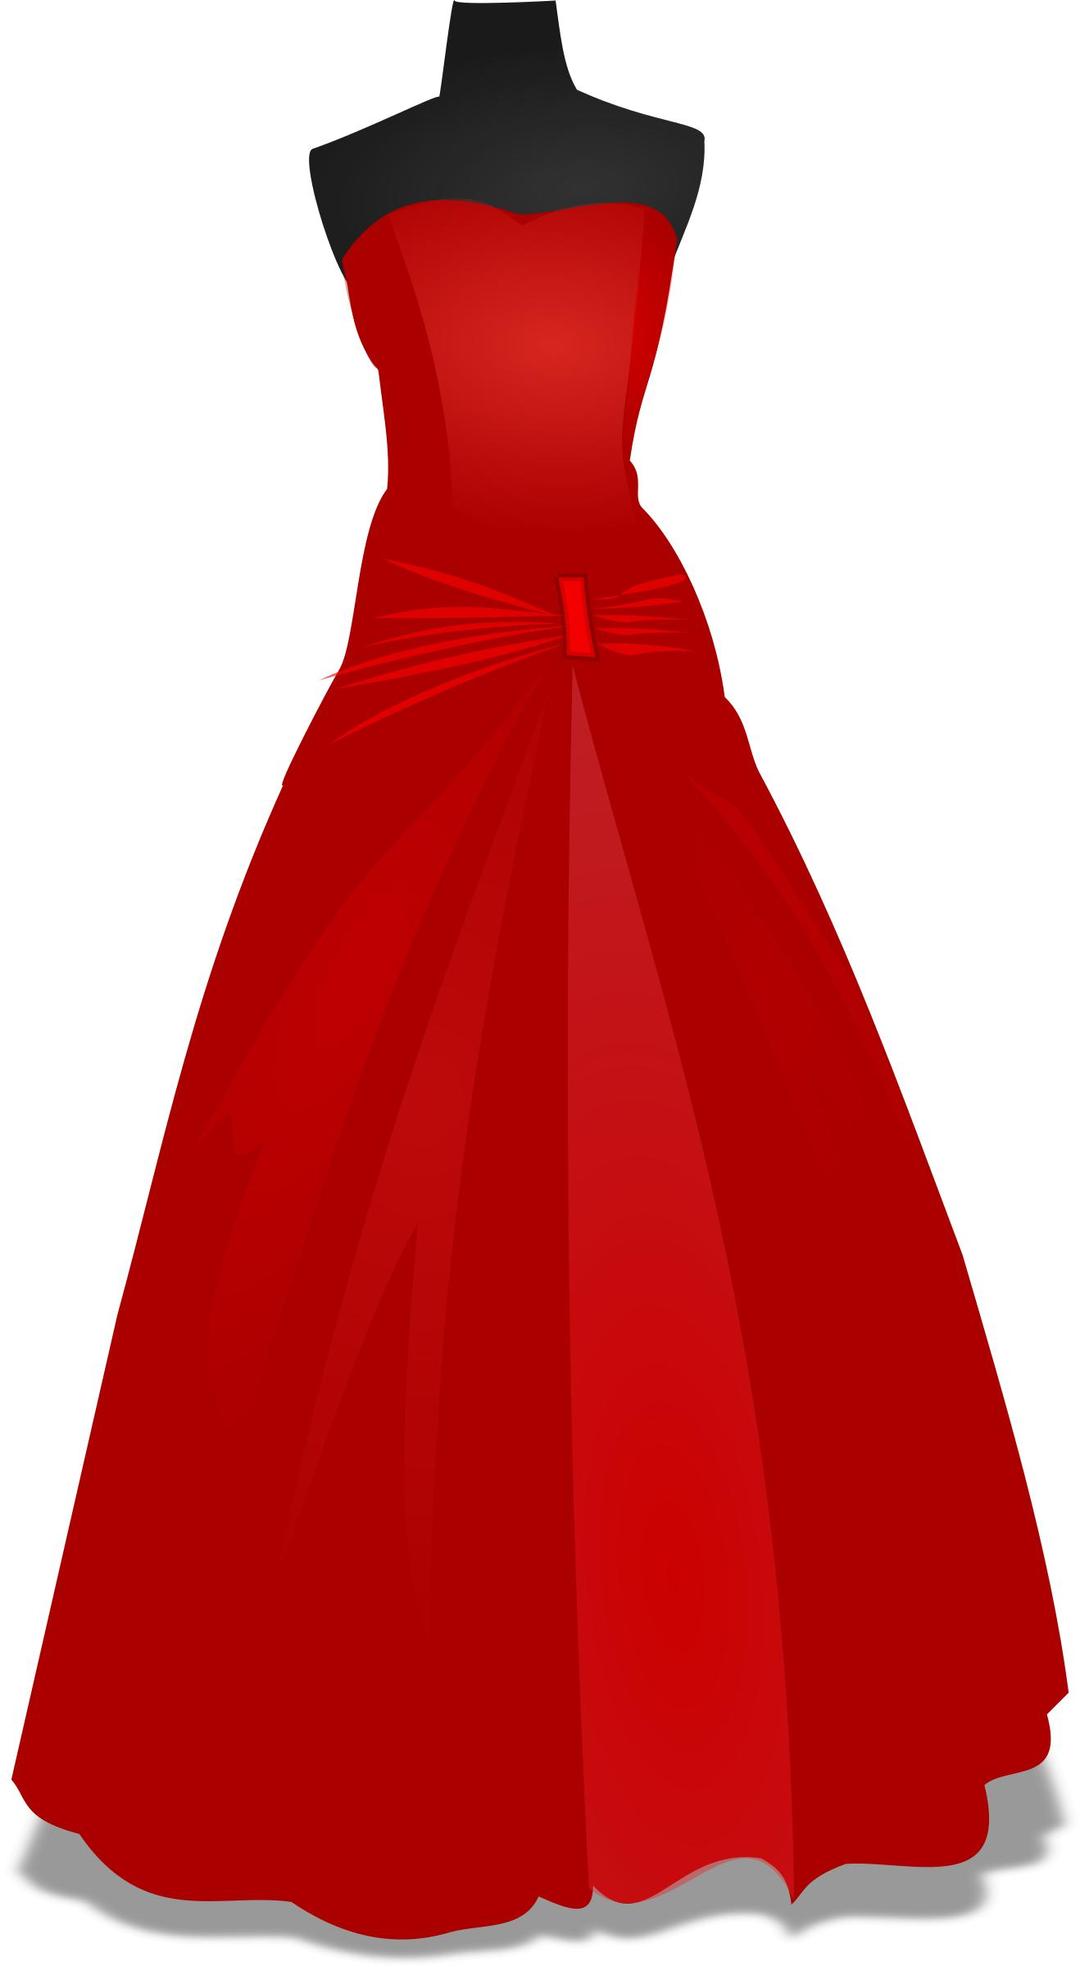 Gown png transparent